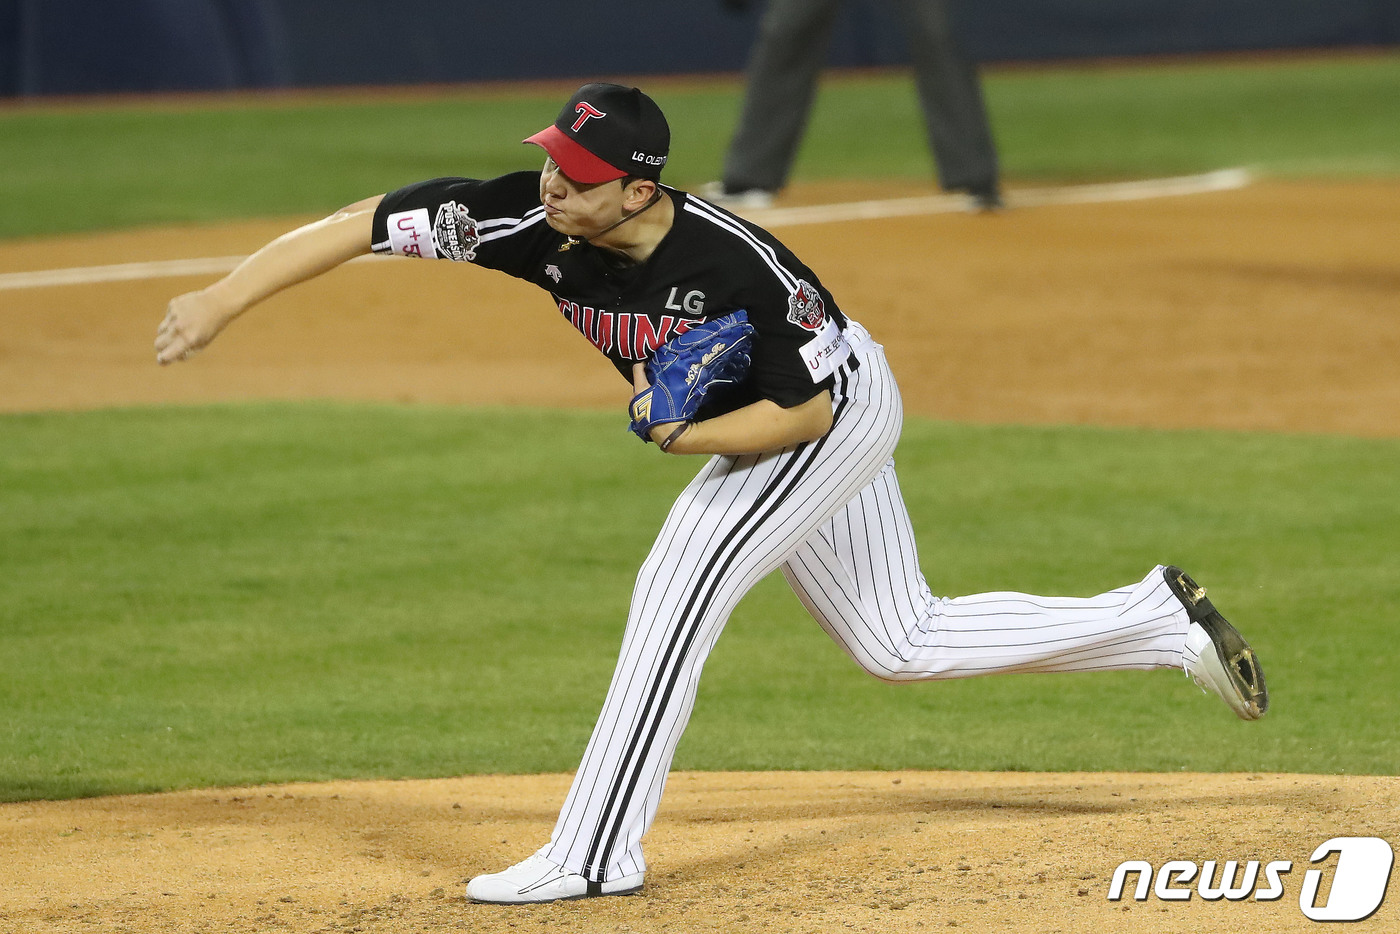 Seoul=) = LG Lee Min-ho is playing against LG Twins in the first game of the semi-playoffs of the SOL KBO postseason at Shinhan Bank in Samsung-dongBaseball Park, Seoul Songpa District, on the afternoon of the 4th.2020.11.4